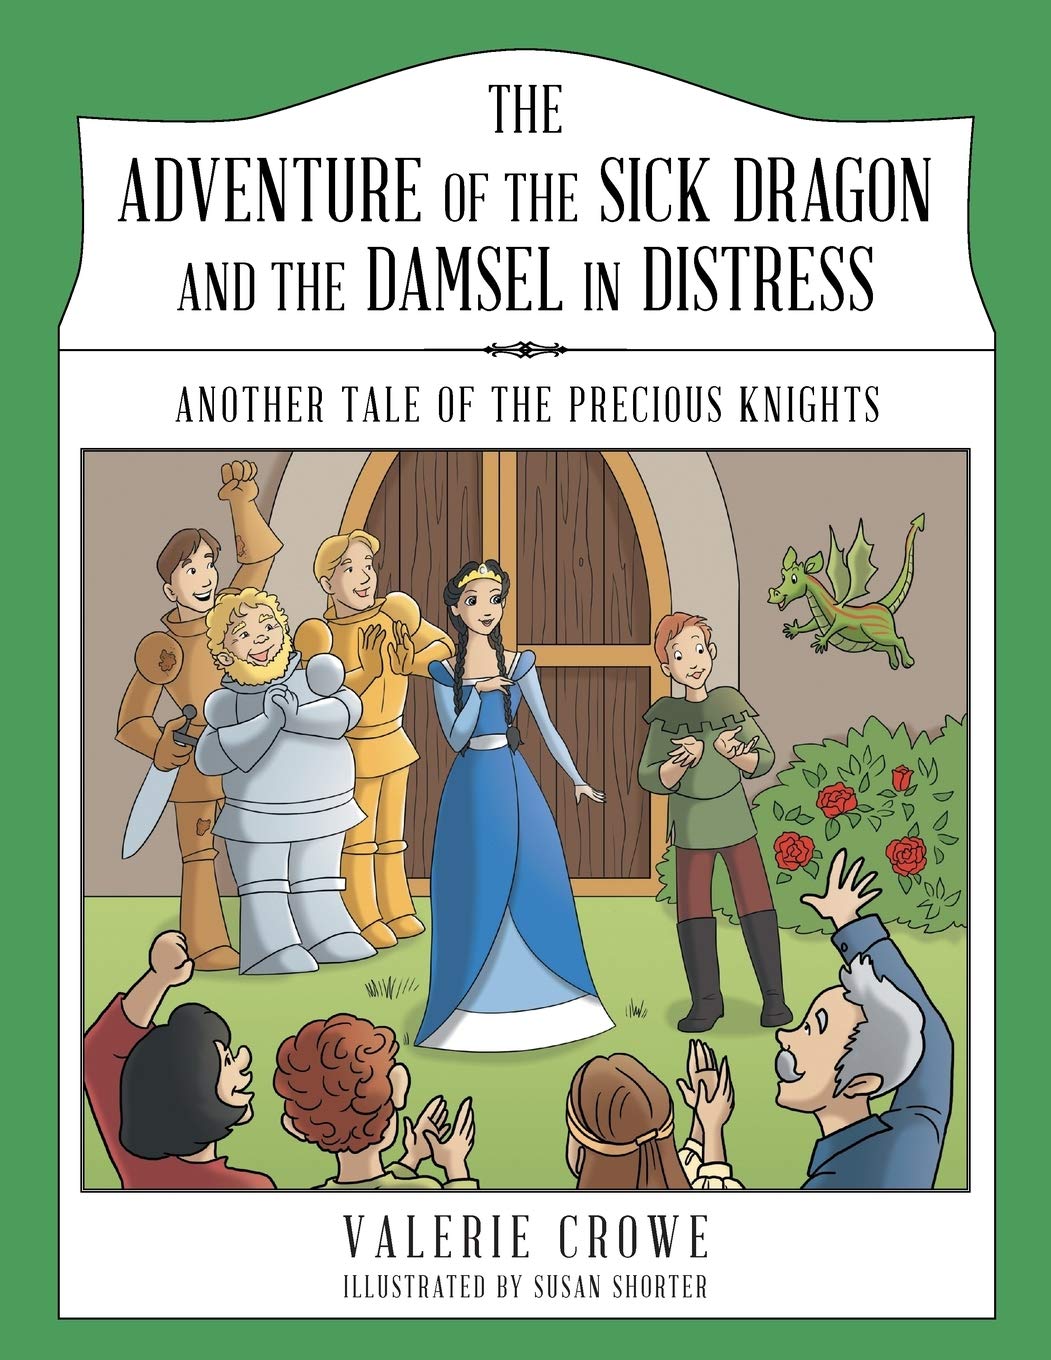 The Adventure of the Sick Dragon and the Damsel in Distress: Another Tale of the Precious Knights - Signed Copy